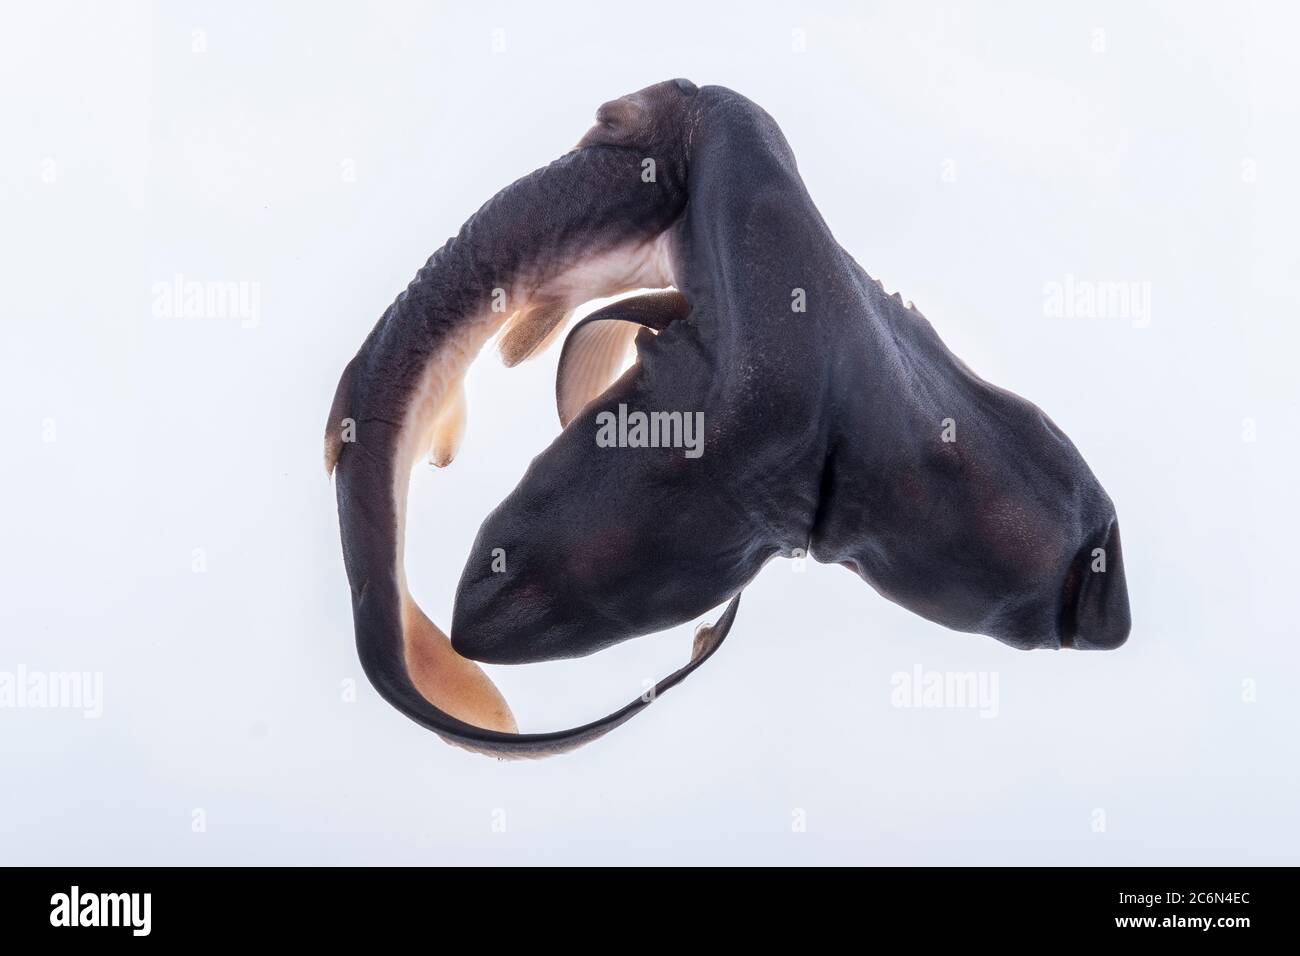 Two-headed baby shark from the collection of the Spanish Institute of Oceanography of Malaga, Spain. Stock Photo